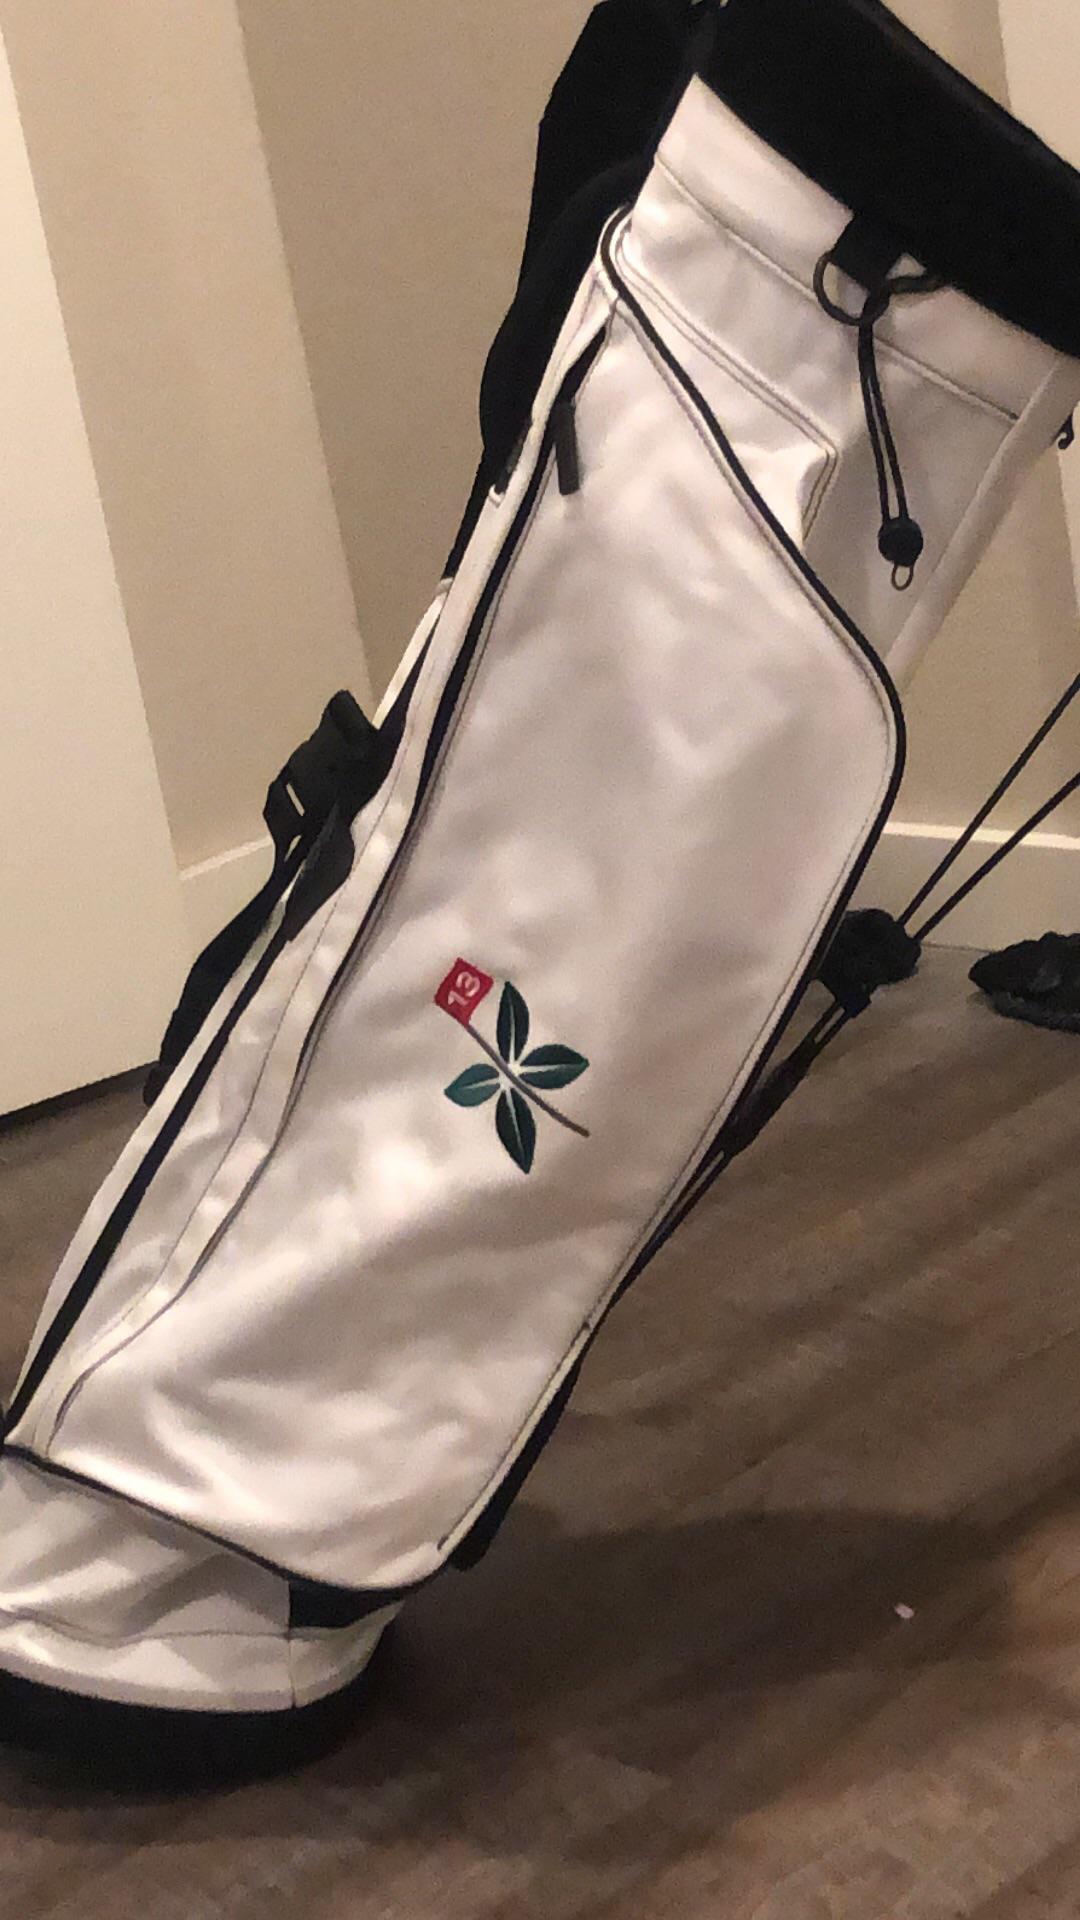 I purchased a new bag